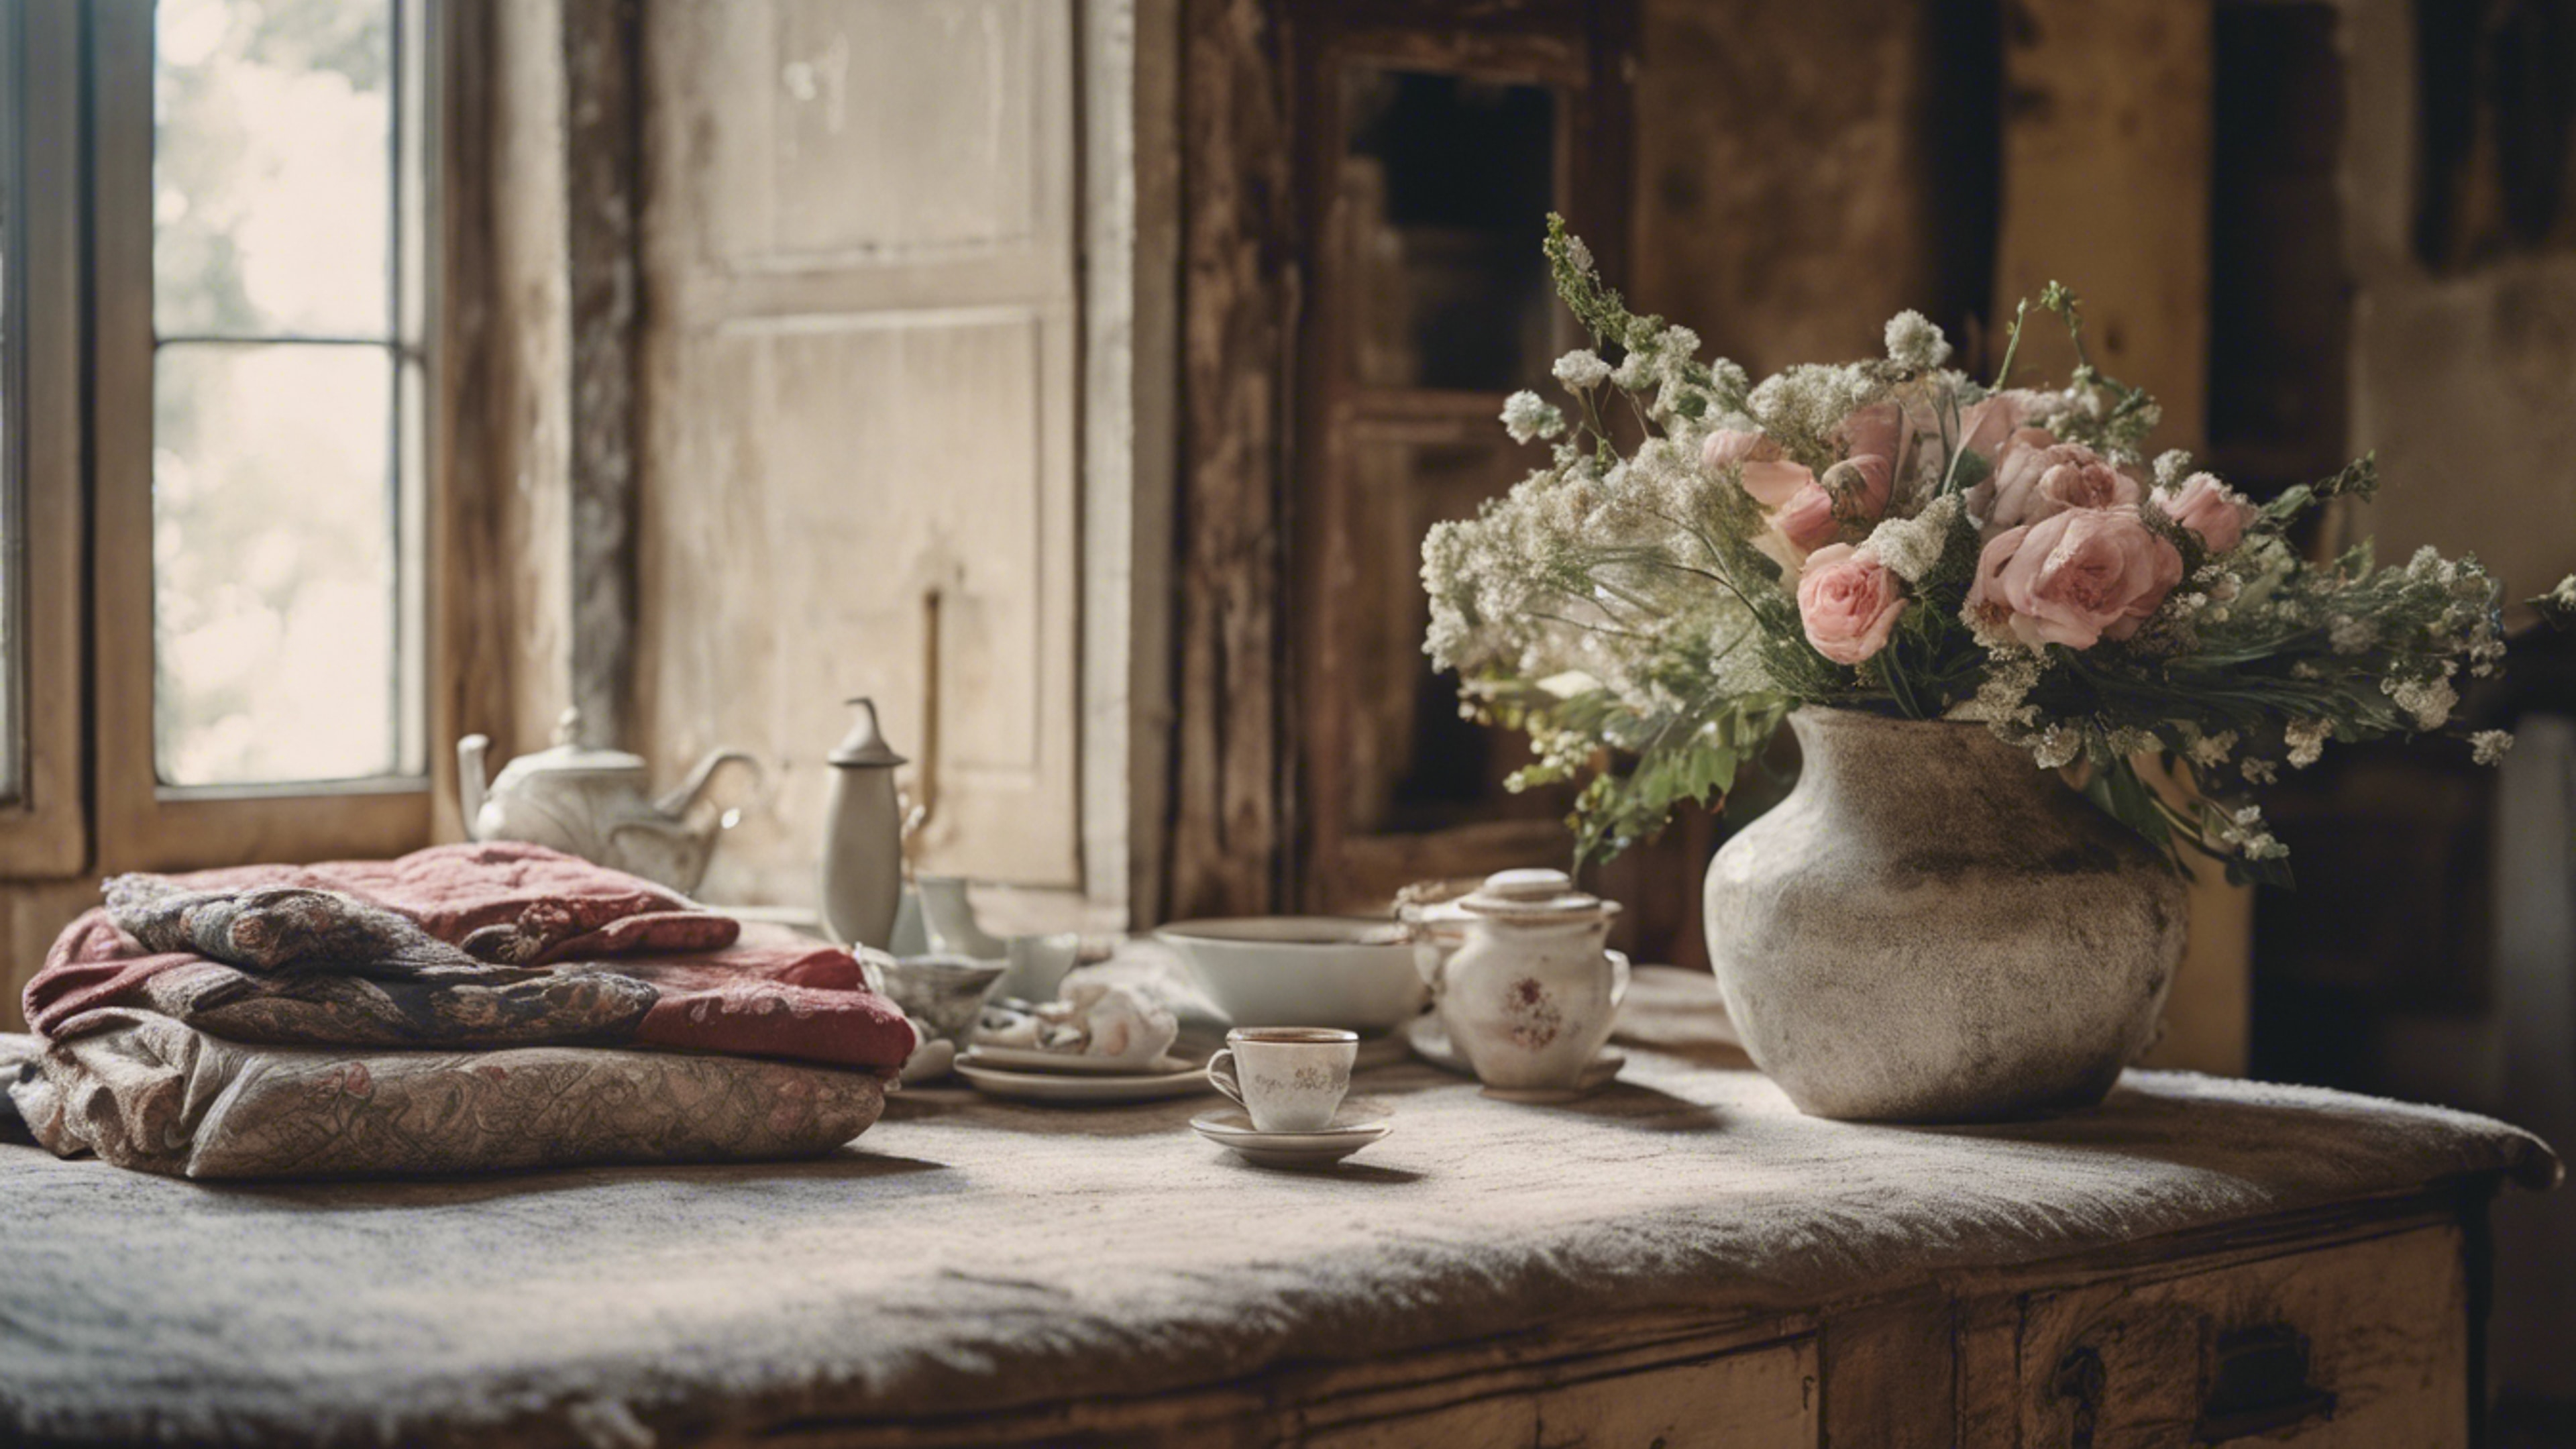 Vintage French country home interiors, full of hand-stitched textiles, distressed furniture, and fresh flowers. Валлпапер[3ce768b1b5e34f149bef]